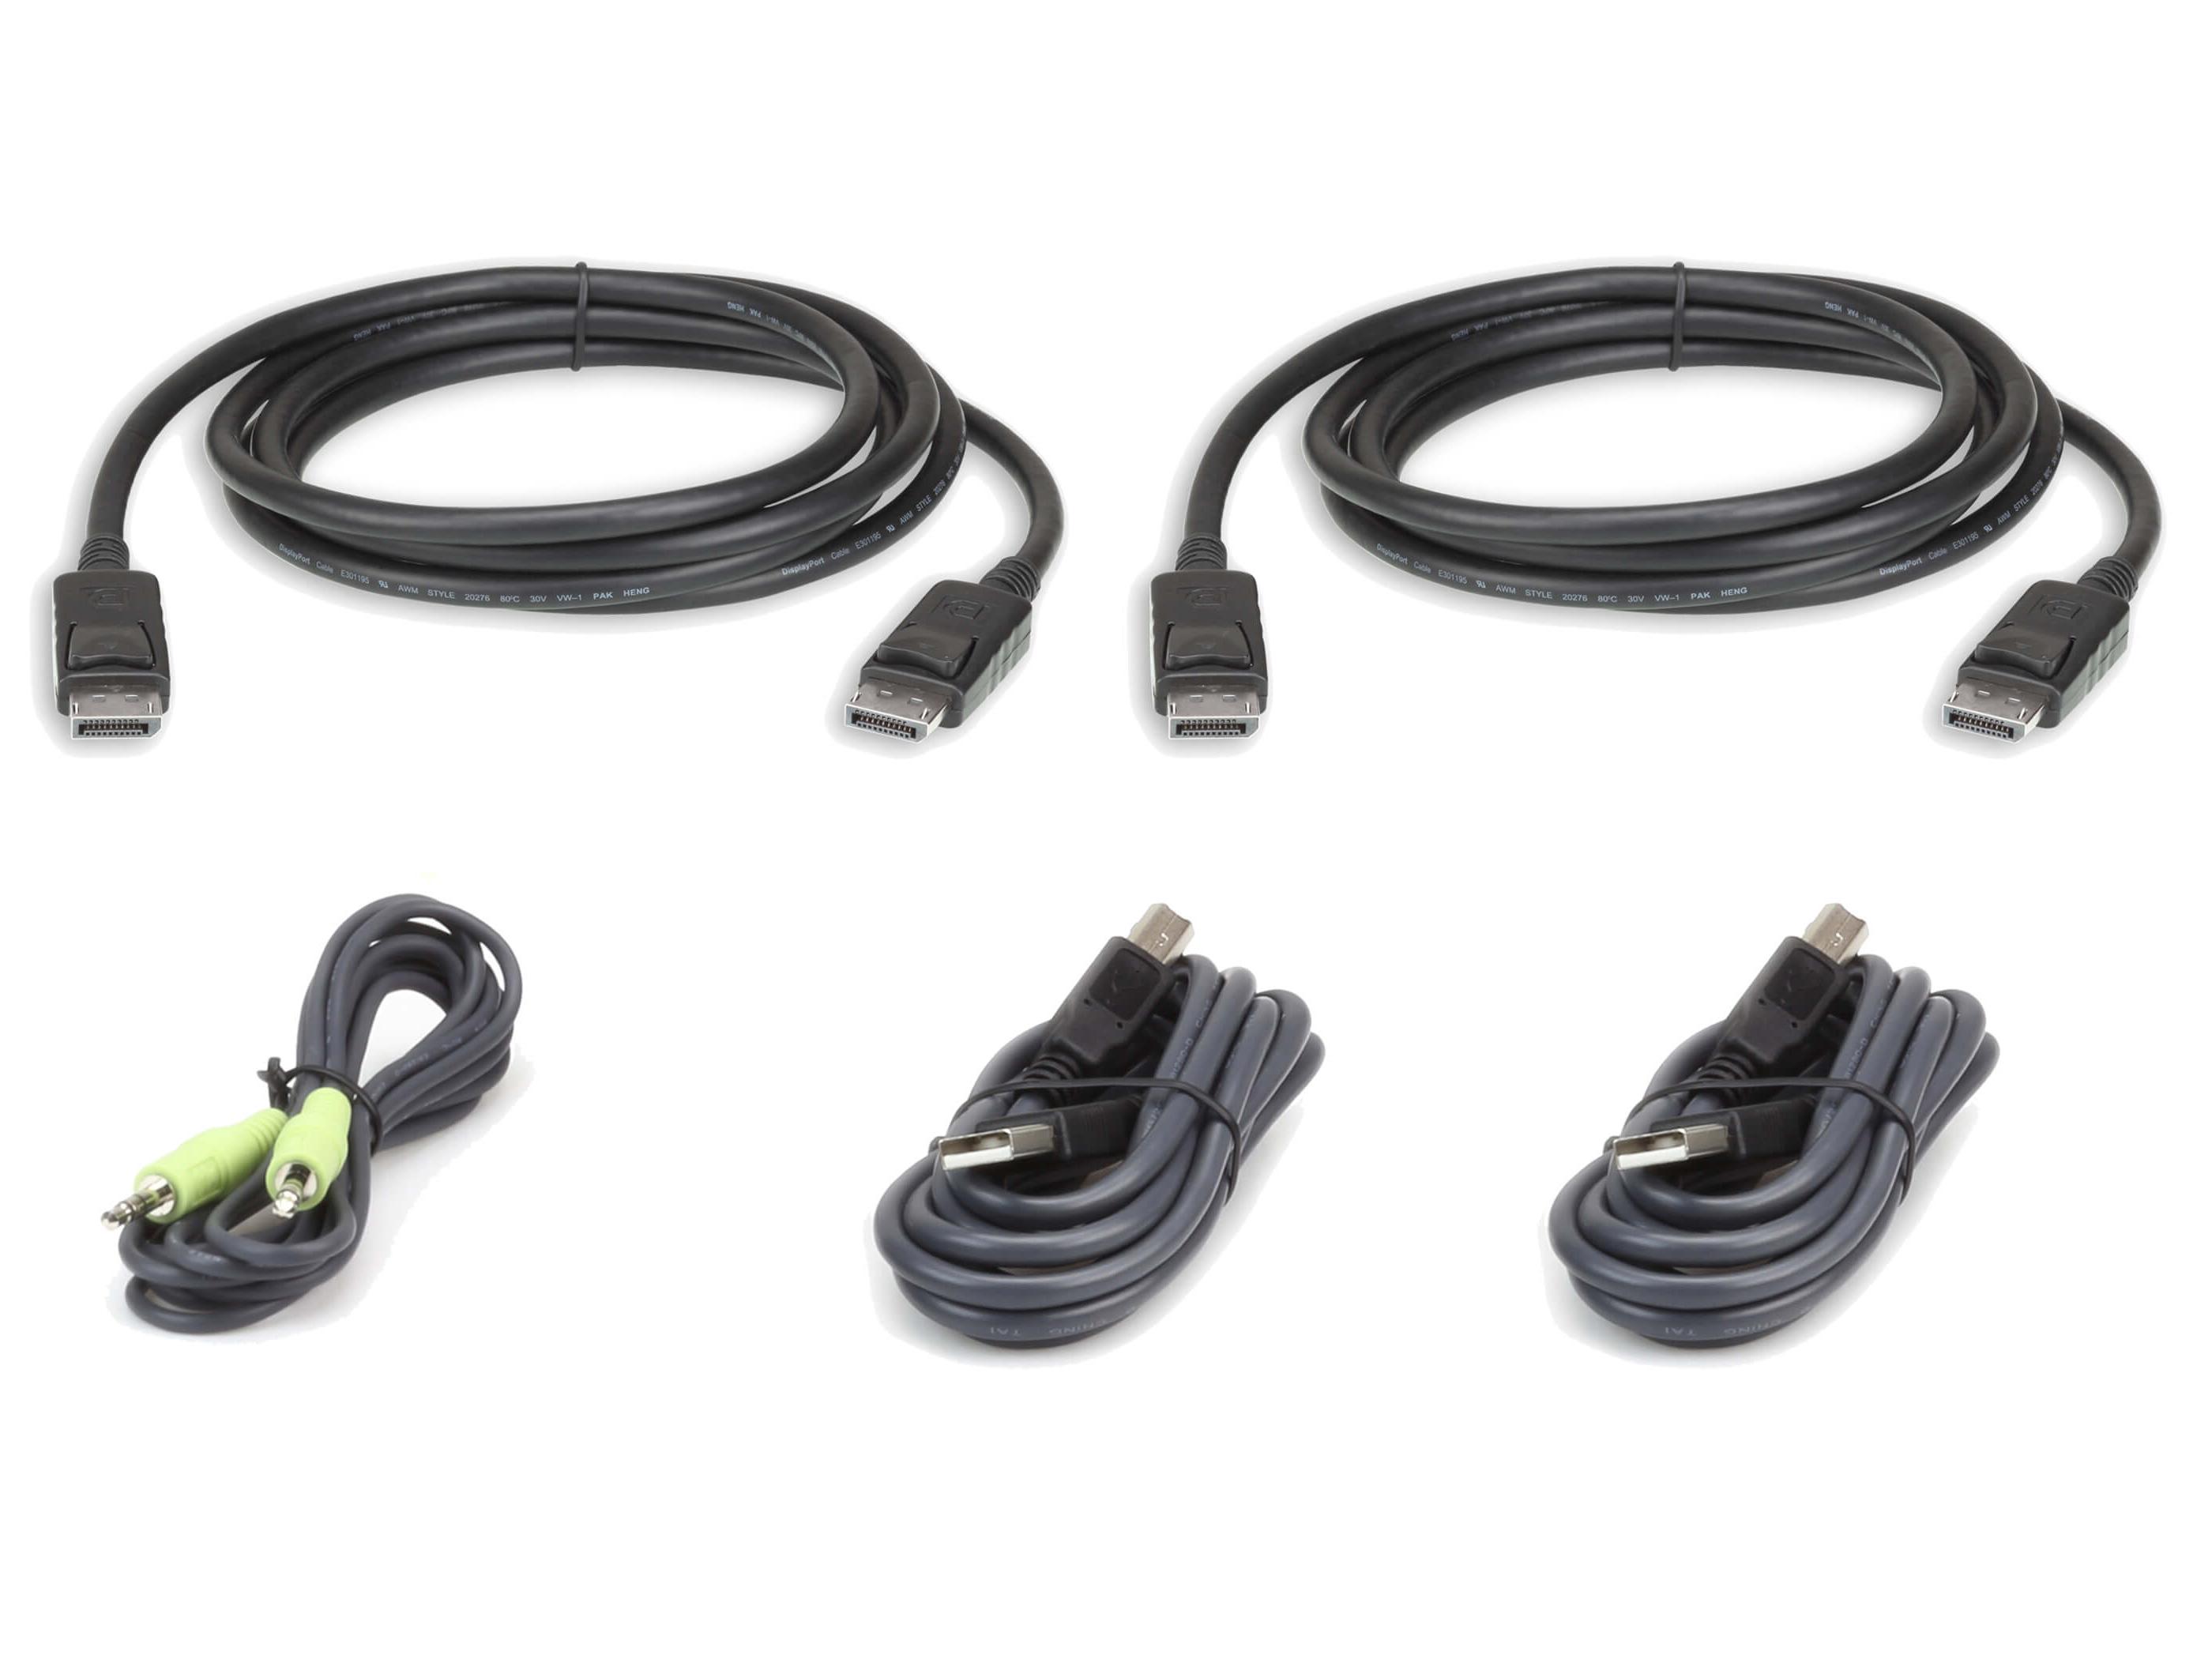 2L7D03UDPX5 10ft Dual Display DisplayPort Secure KVM Cable Kit by Aten